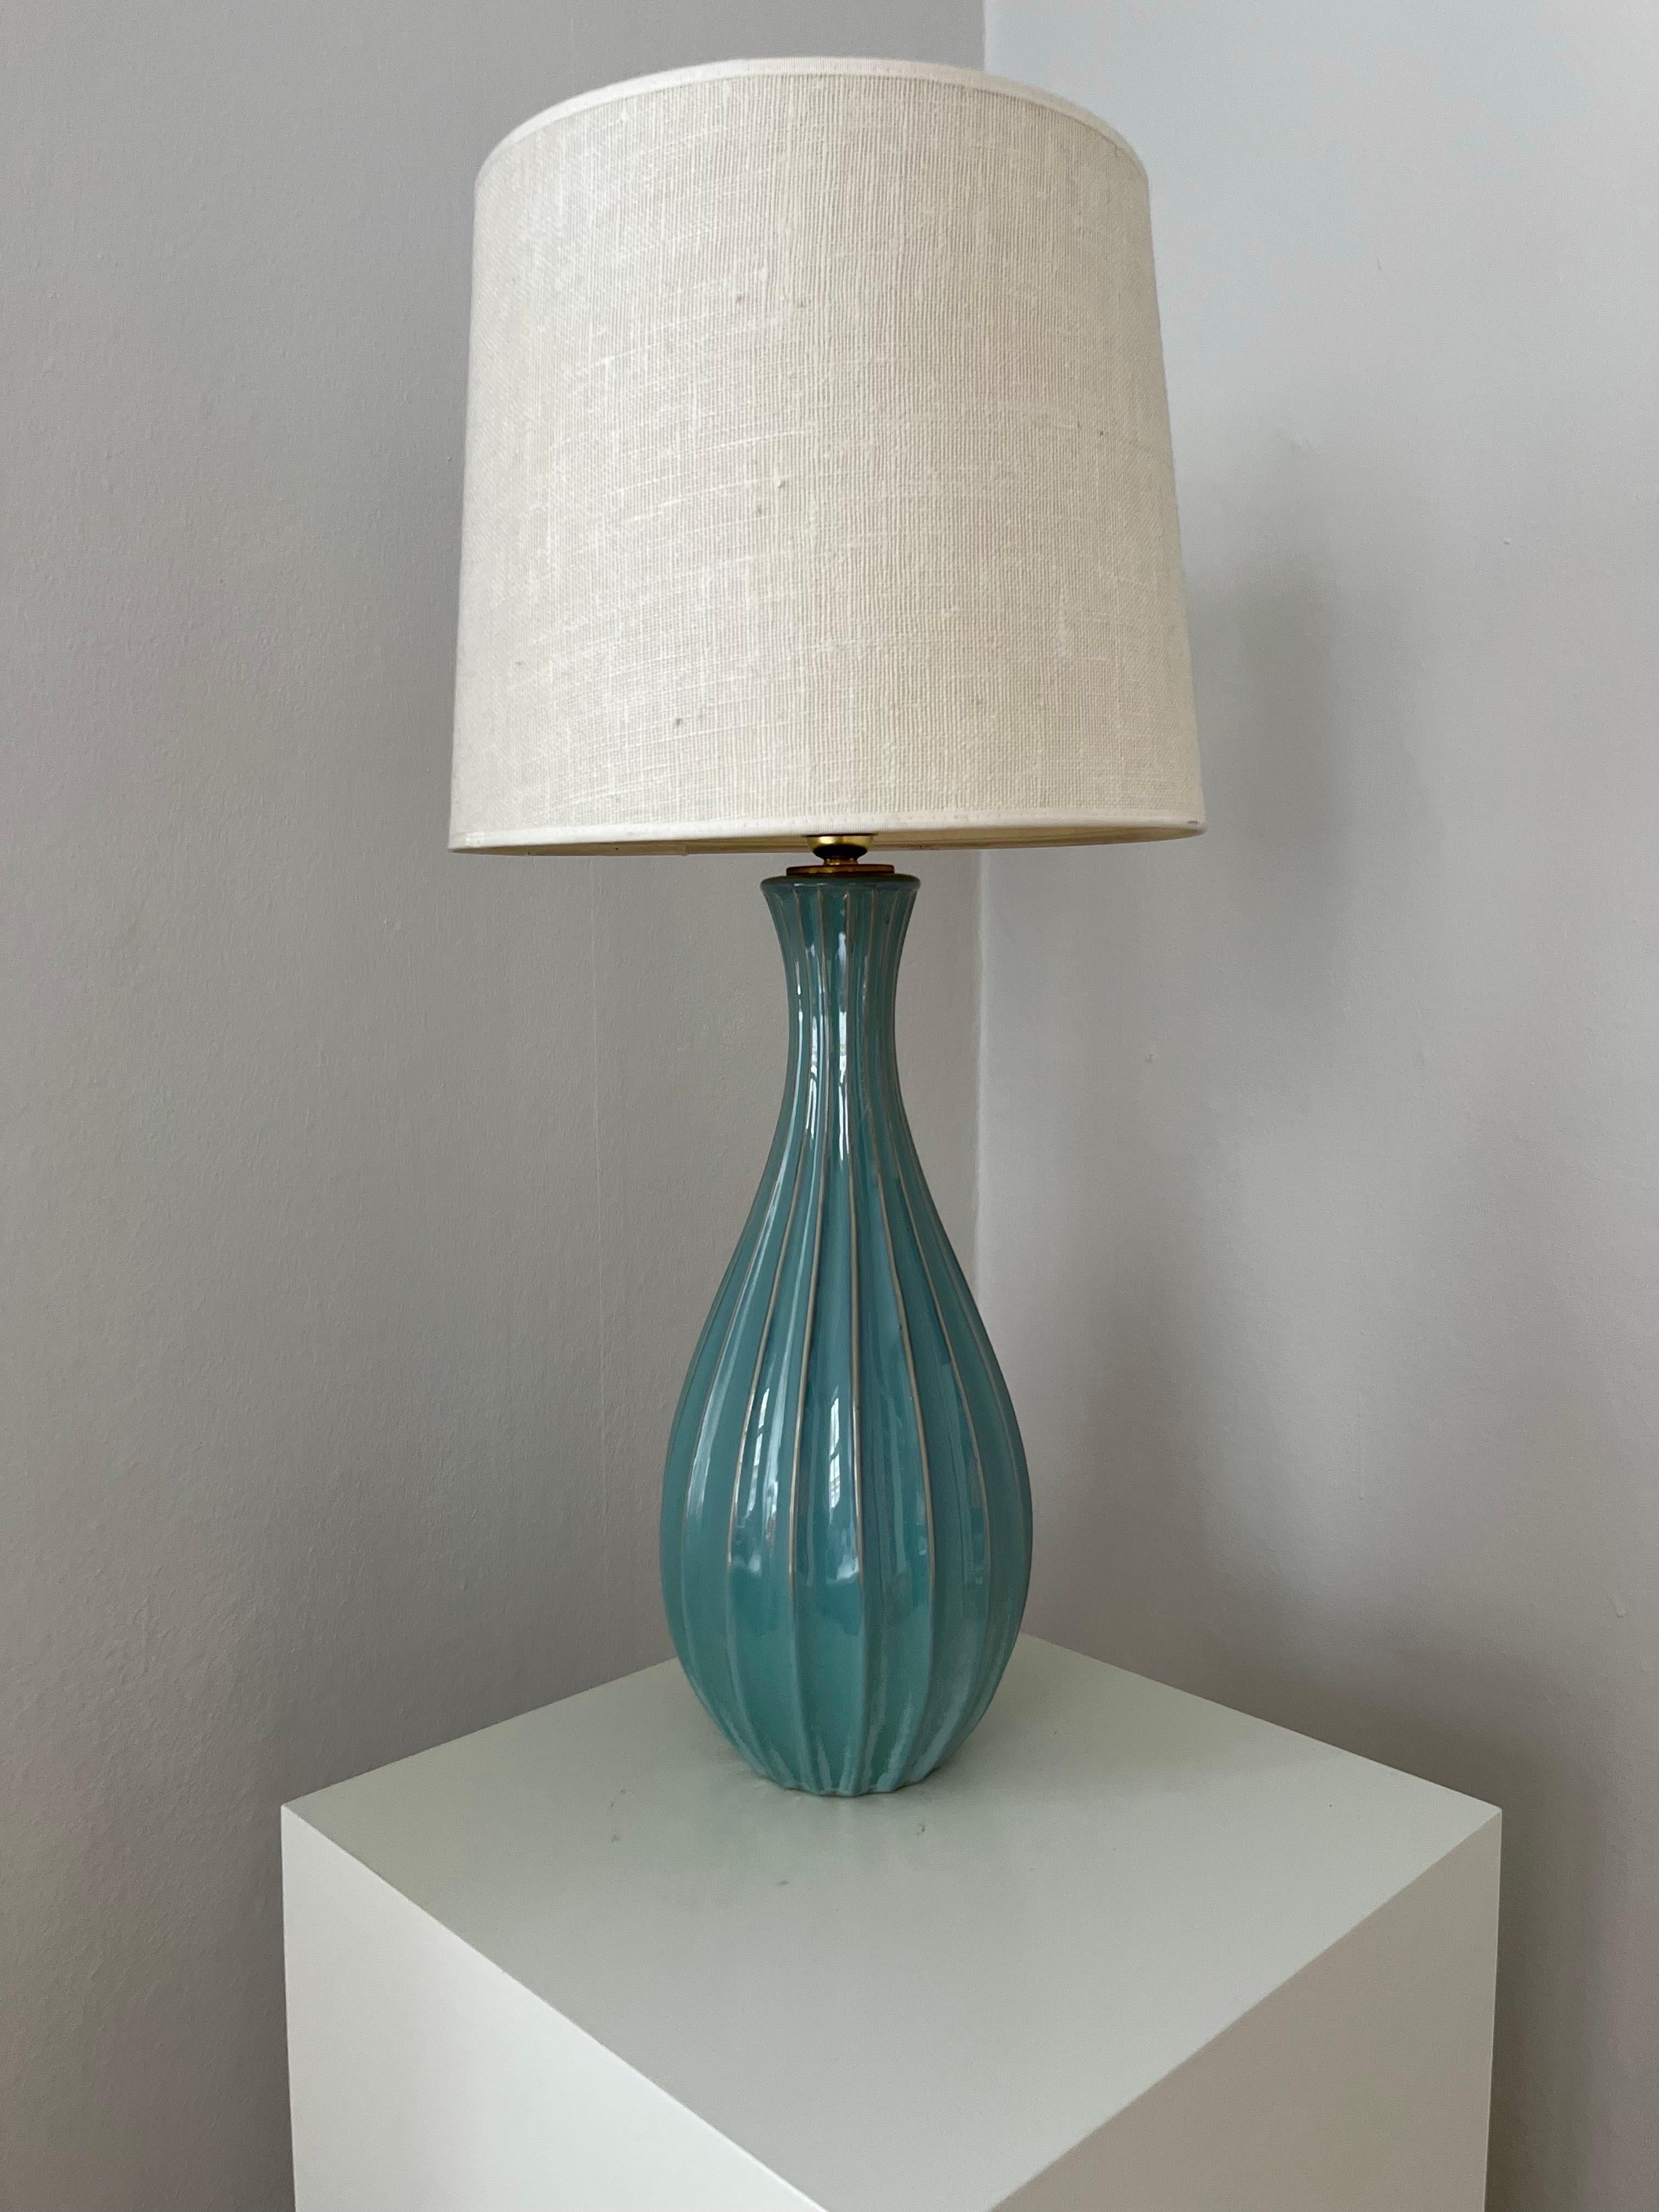 Tall Swedish Mid-Century fluted ceramic table lamp. This amazing, tall table lamp is made in fluted ceramic with a shiny blue/turquoise glaze and has a golden socket. 
It is 49,5 cm tall (19.49 in) with the socket, and it has a diameter of 18 cm